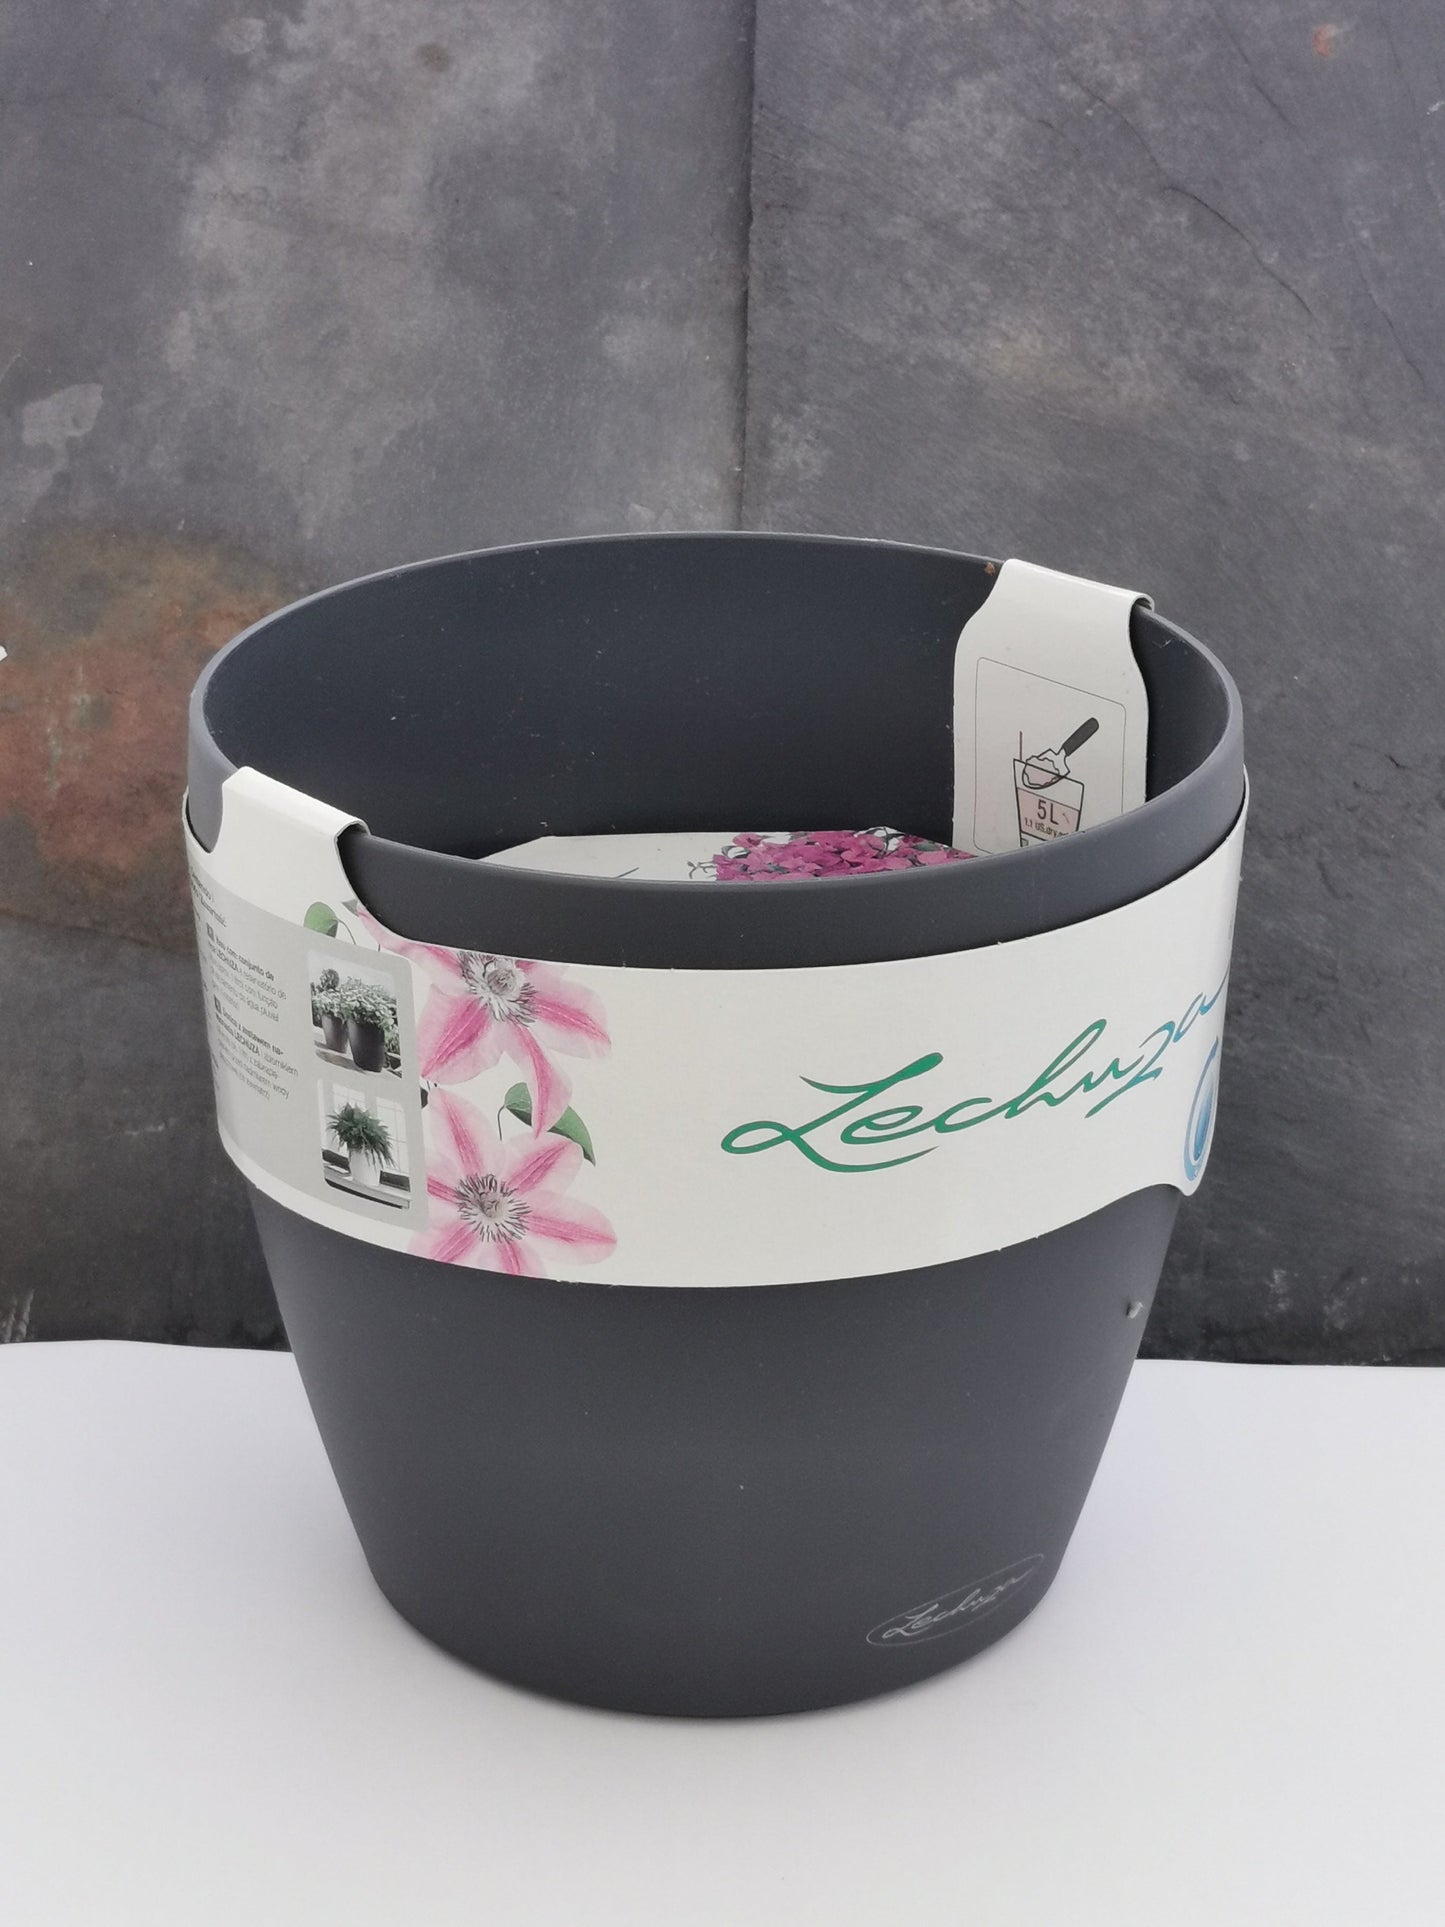 Extra Large Self-watering Lechuza Pots - Classico (dusty/slightly damaged packaging)